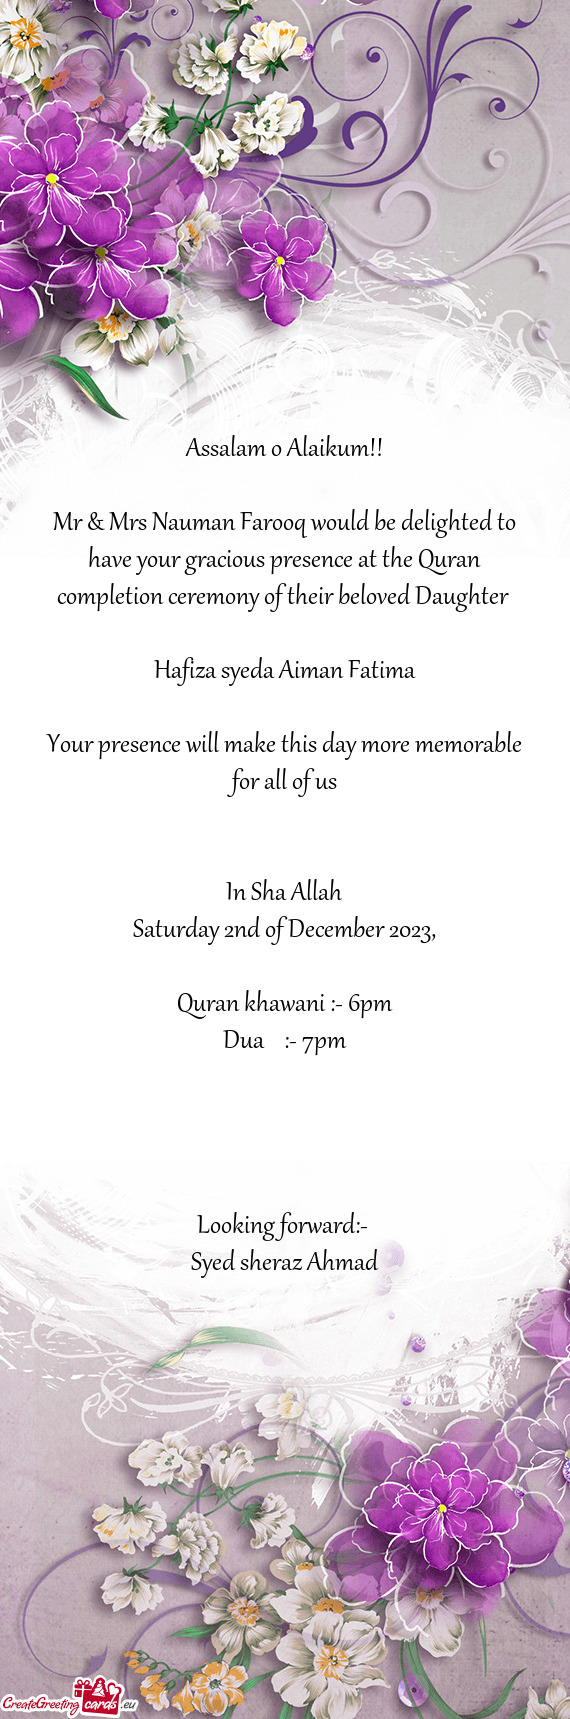 Mr & Mrs Nauman Farooq would be delighted to have your gracious presence at the Quran completion cer